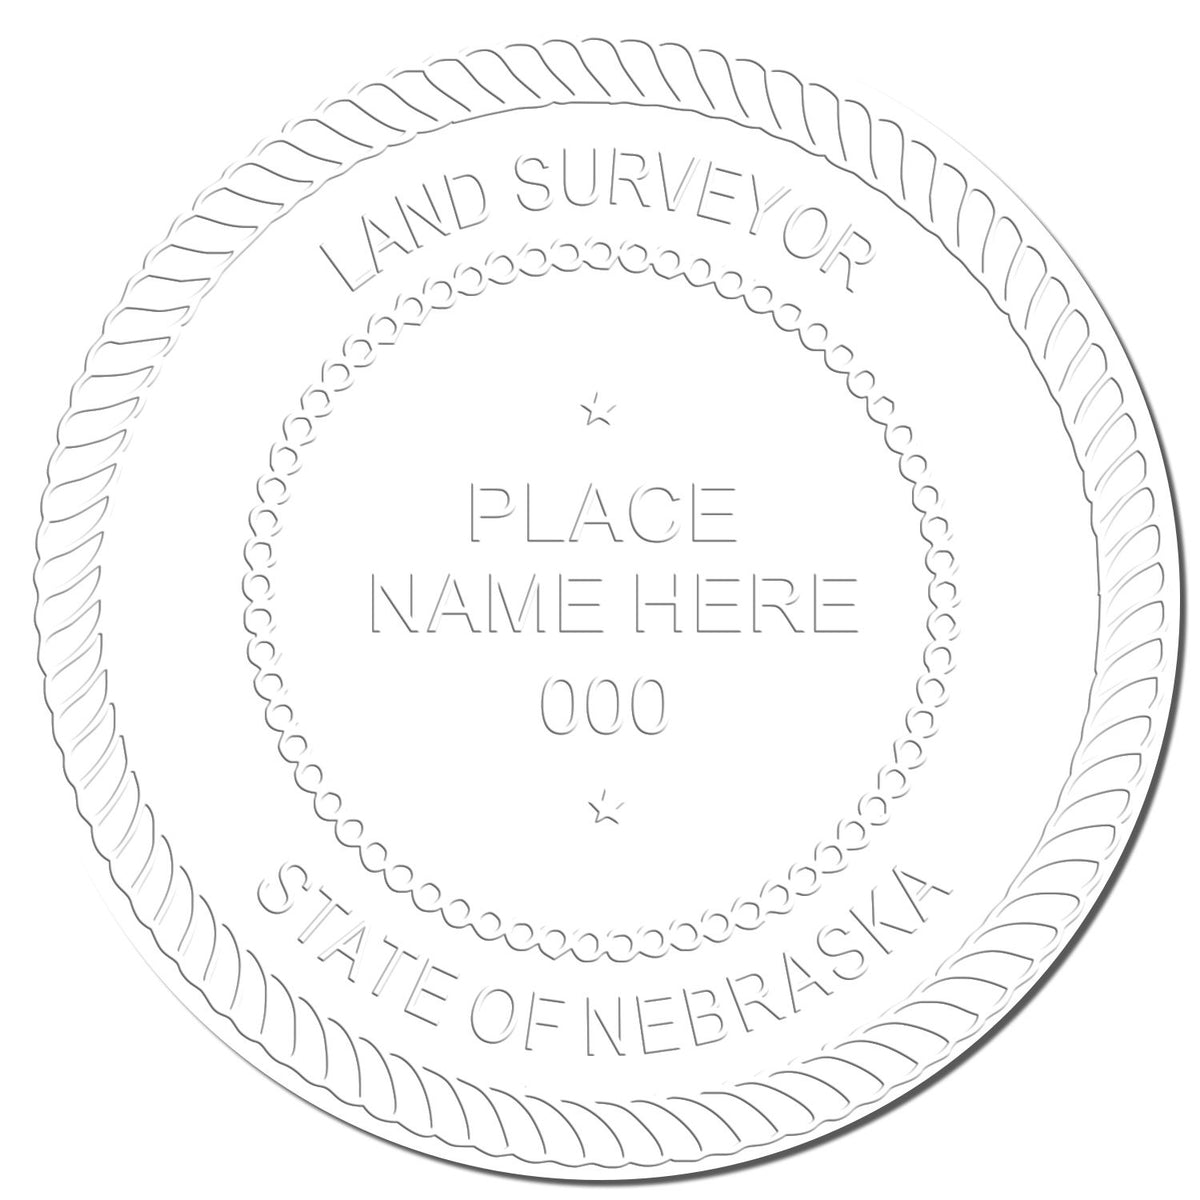 This paper is stamped with a sample imprint of the Heavy Duty Cast Iron Nebraska Land Surveyor Seal Embosser, signifying its quality and reliability.